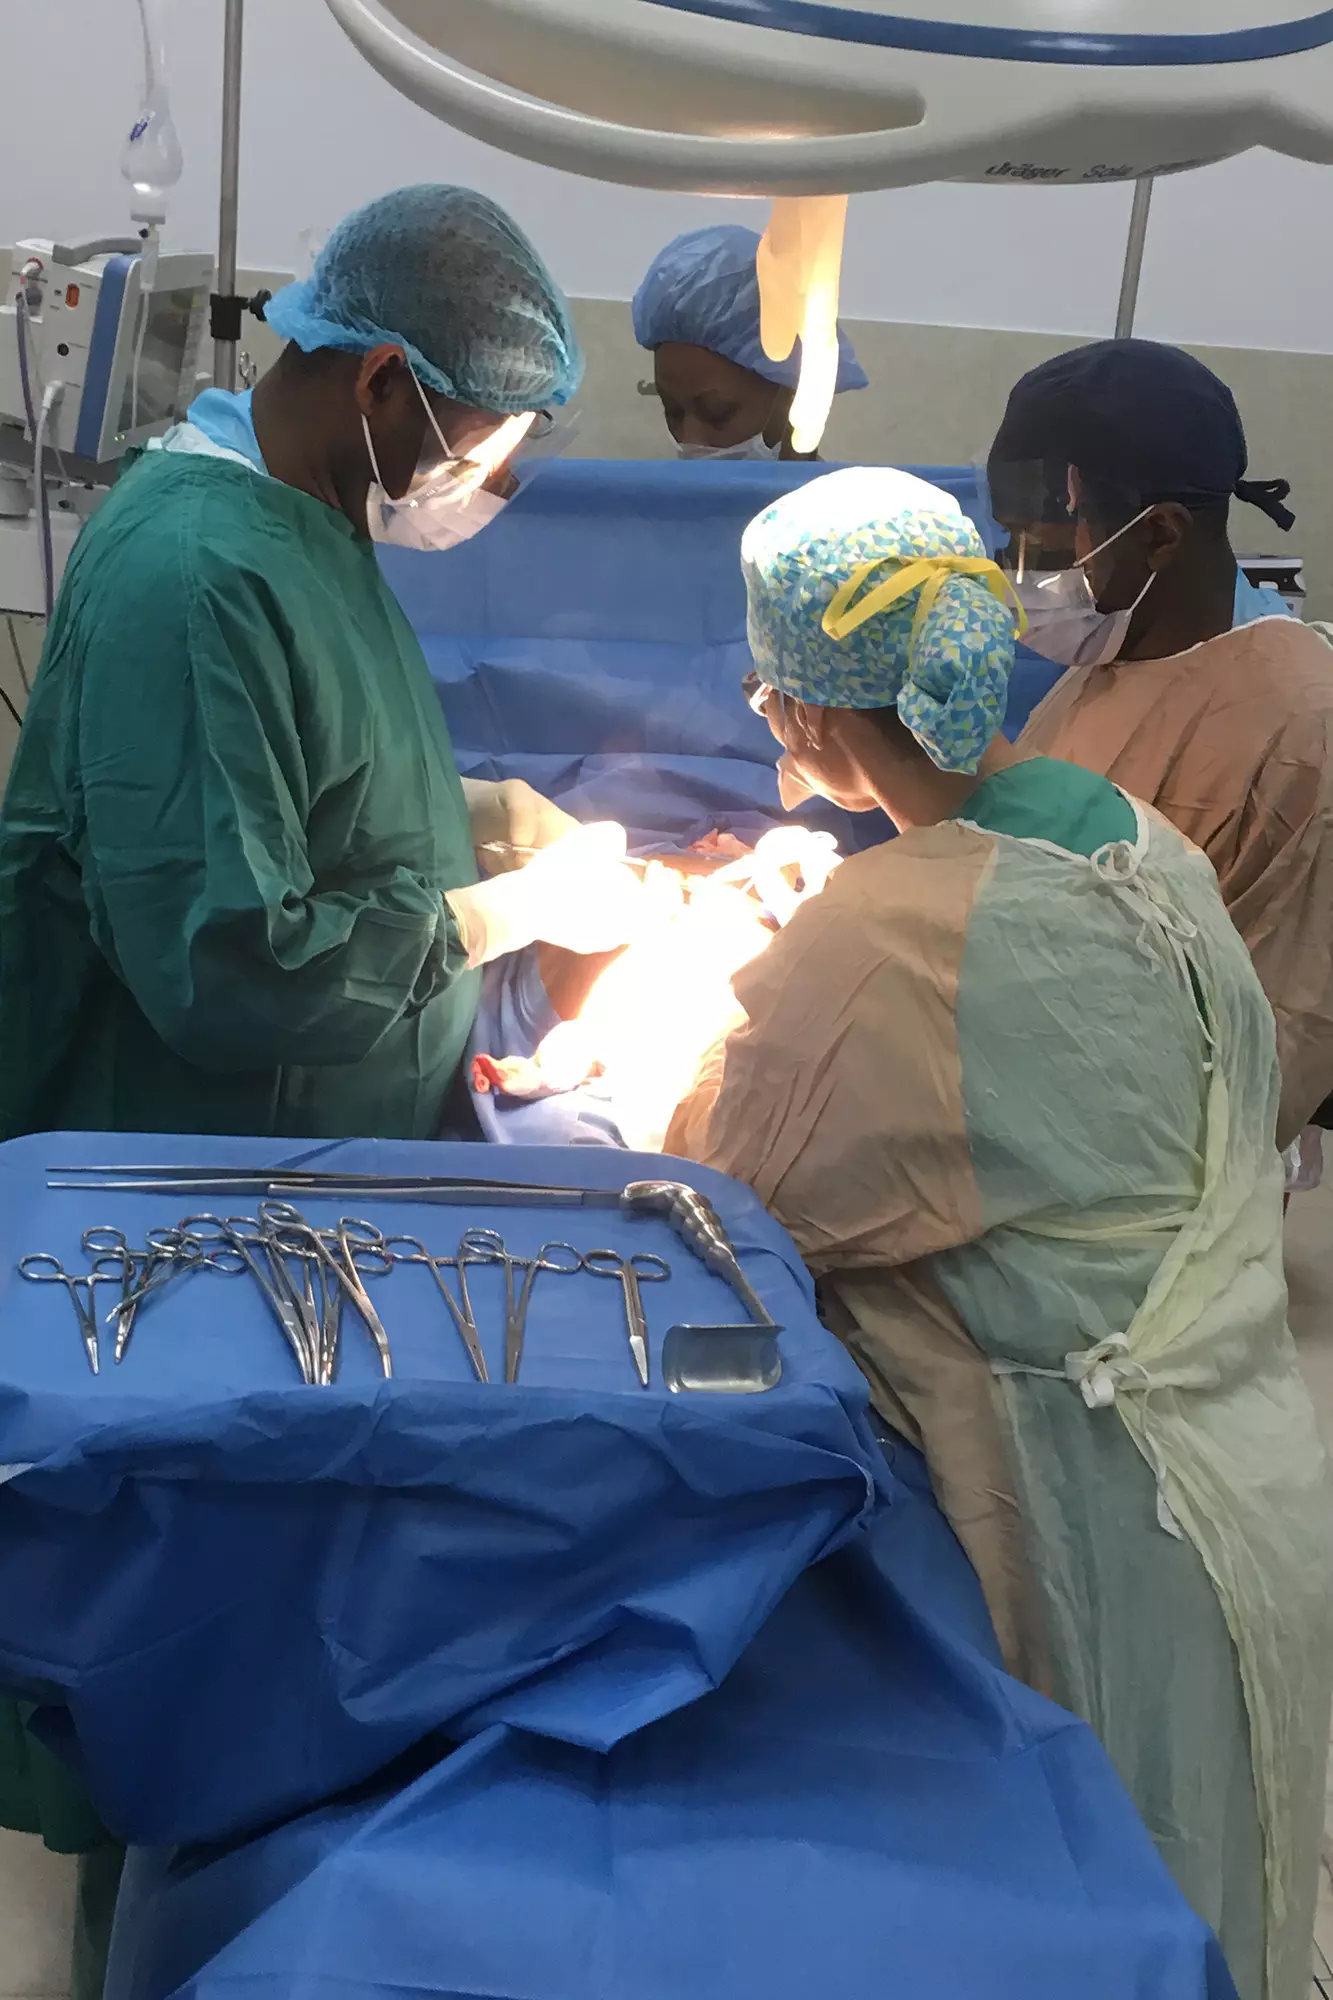 Dr. McKenzie’s (in yellow scrubs) last mission trip to Haiti to lend her surgical expertise to other physicians in an effort to mentor local professionals and improve healthcare in the country.